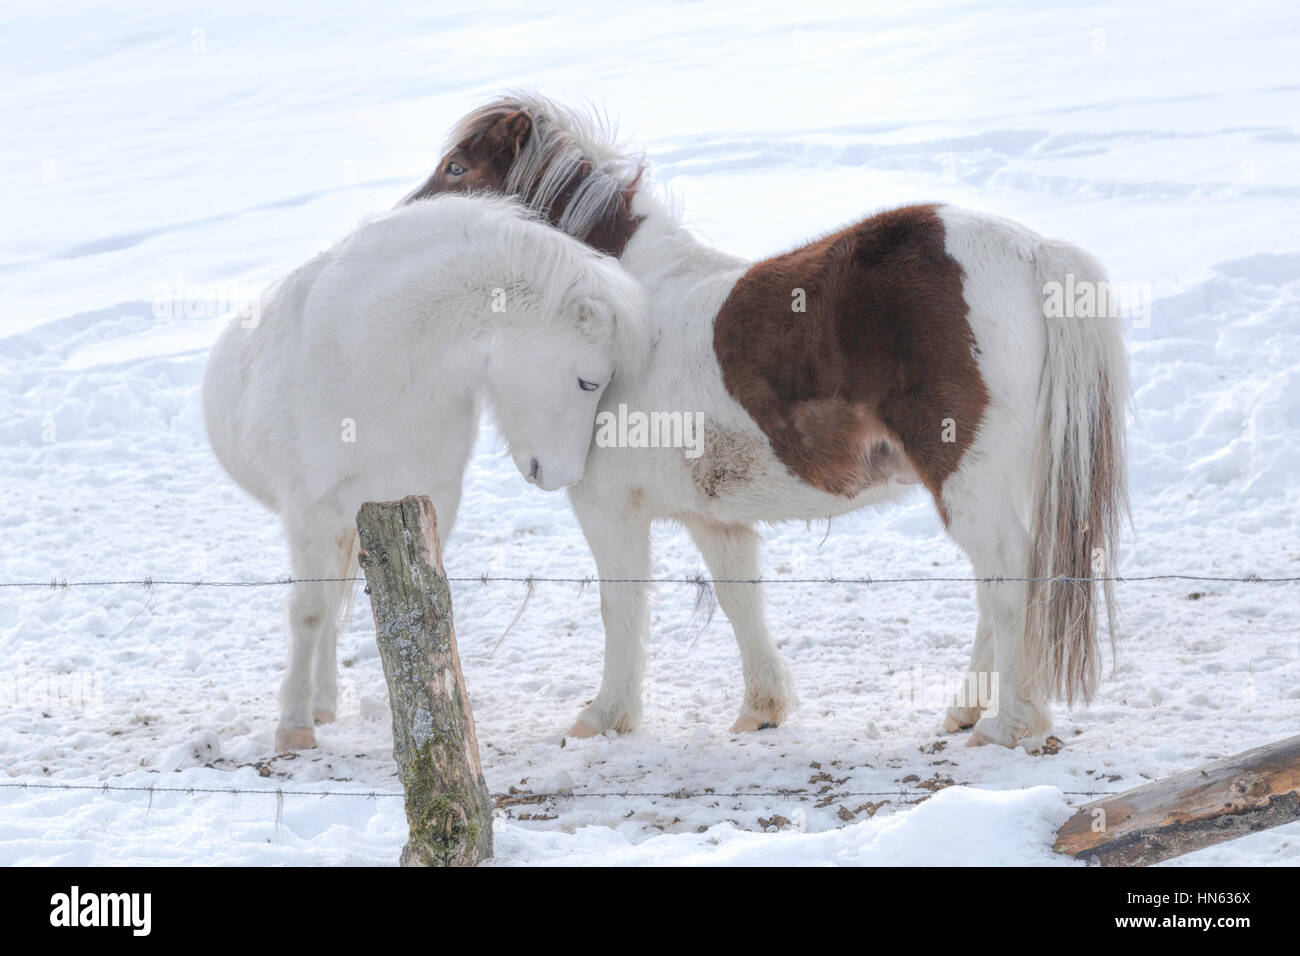 Two Shetland Pony horses hugging each other in a snow-covered field, Sauerland, Germany. Stock Photo